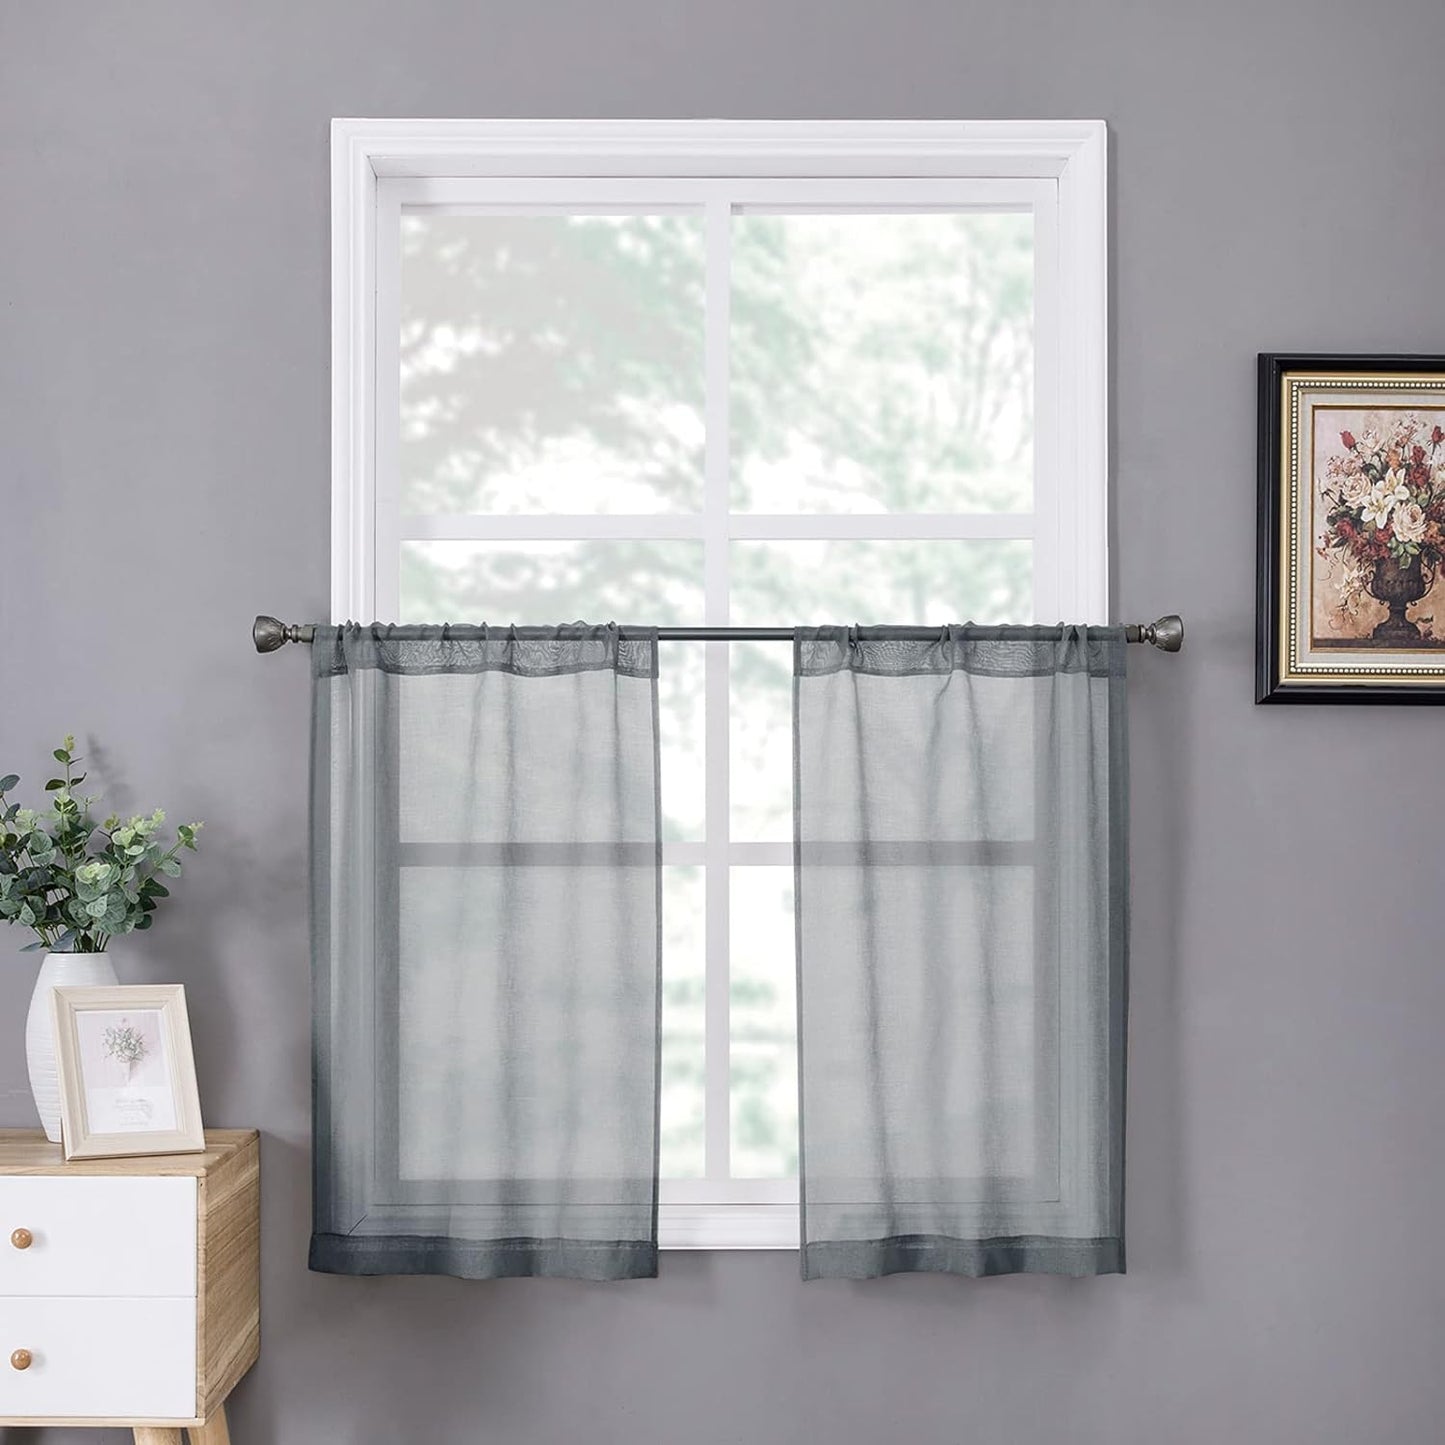 Tollpiz Short Sheer Curtains Linen Textured Bedroom Curtain Sheers Light Filtering Rod Pocket Voile Curtains for Living Room, 54 X 45 Inches Long, White, Set of 2 Panels  Tollpiz Tex Dark Grey 25"W X 24"L 